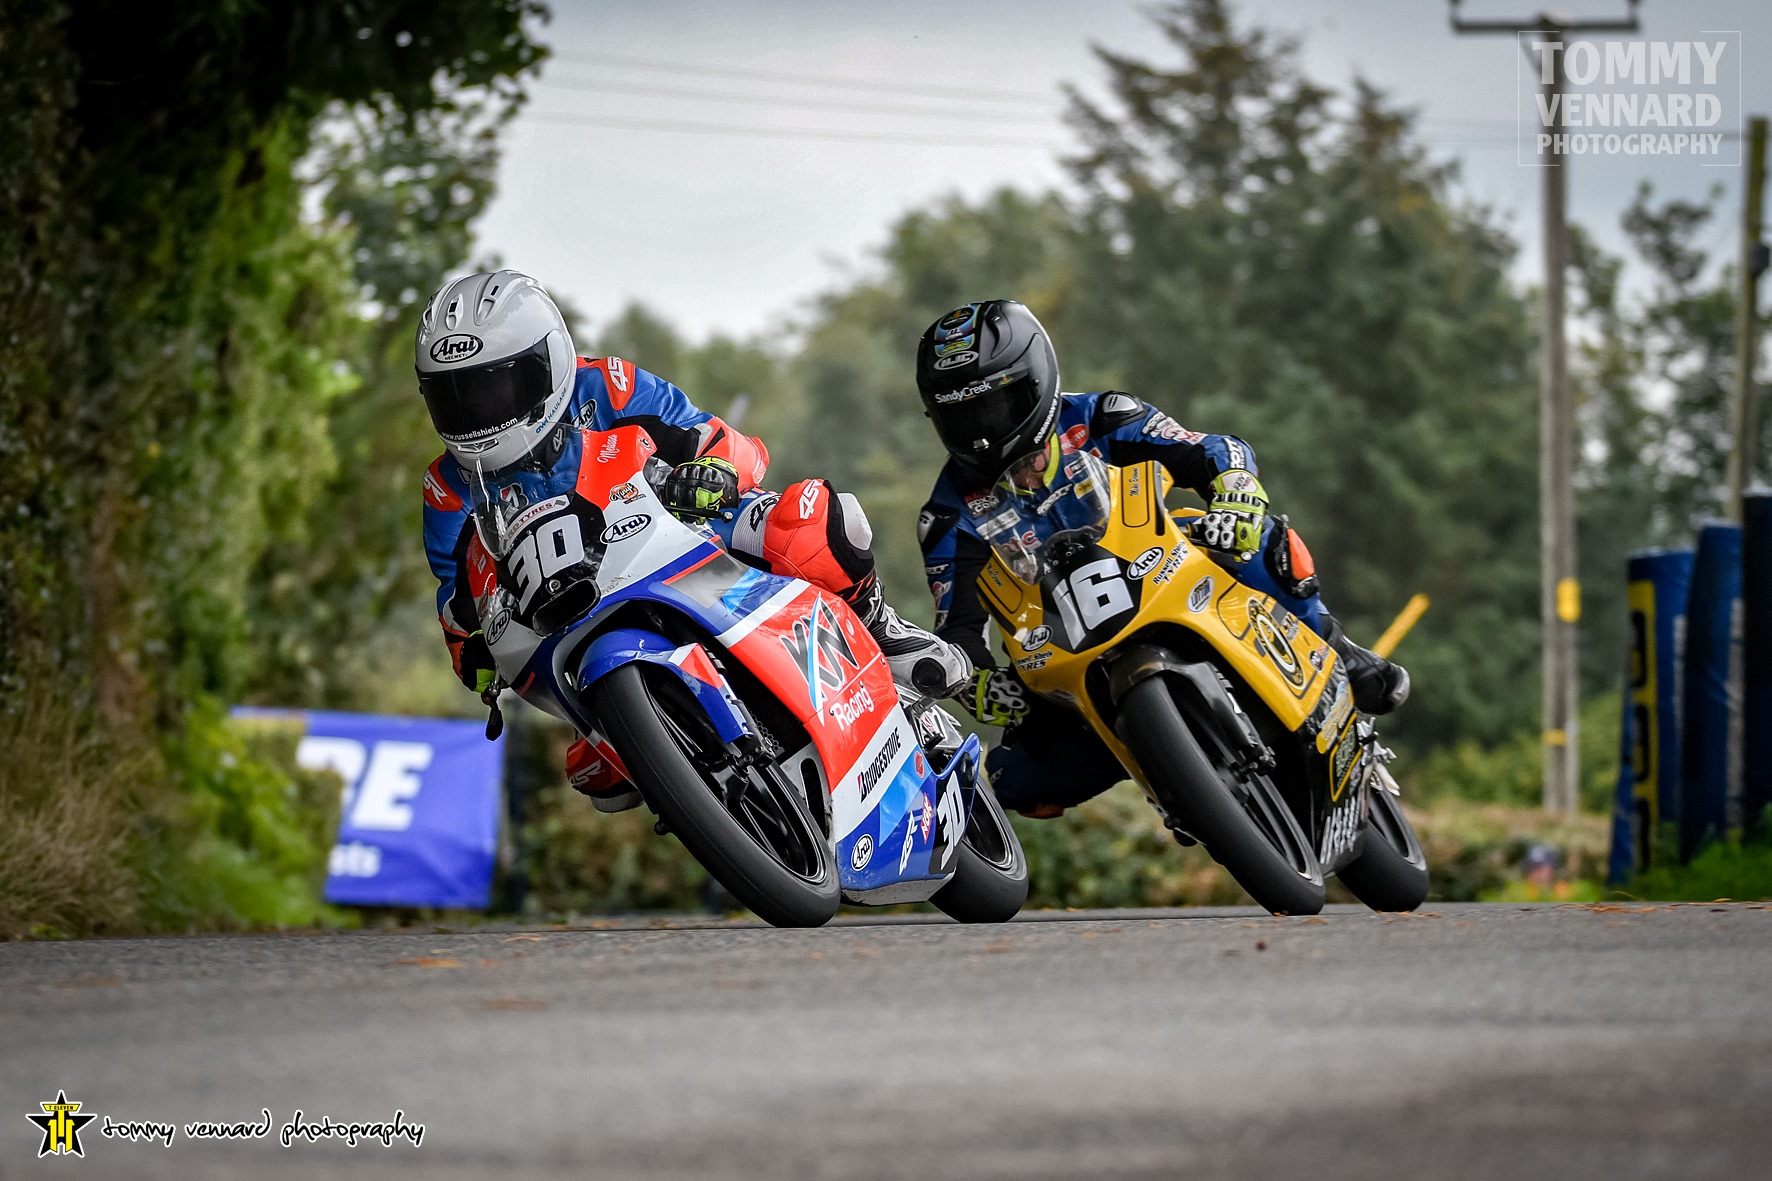 100th Anniversary Cookstown 100: Practice/Qualifying/Race Schedule